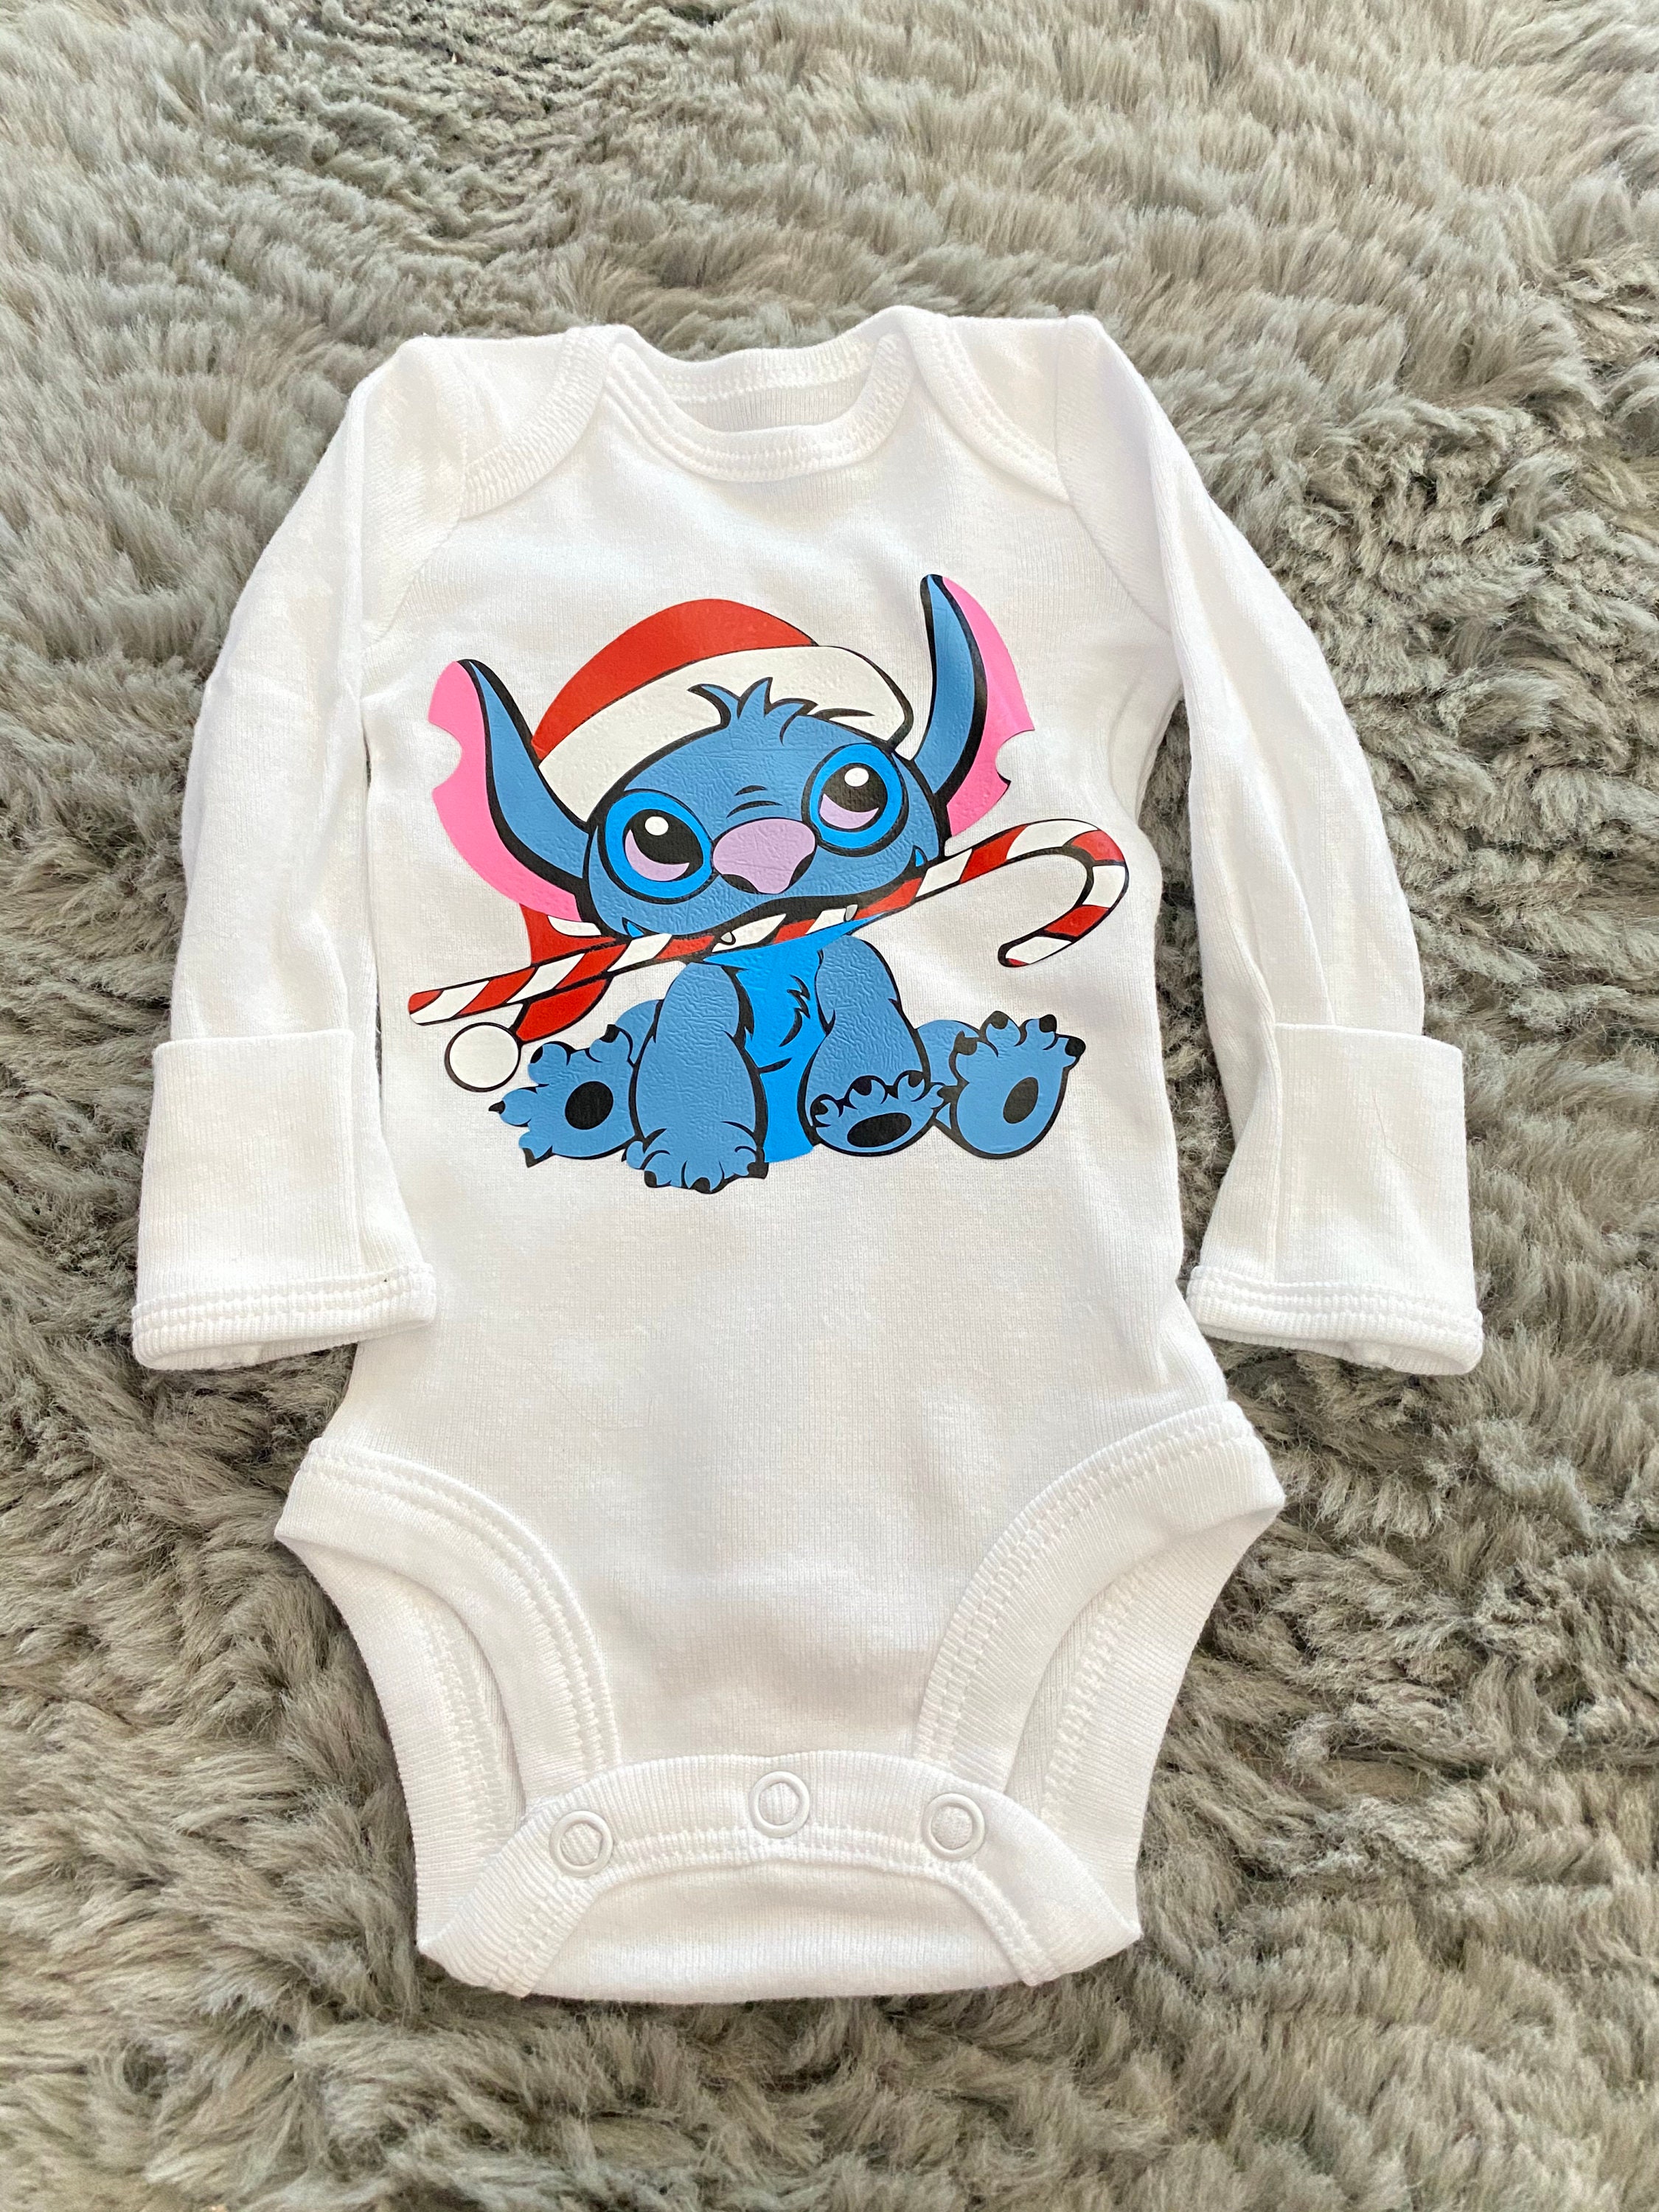 Lilo and Stitch Christmas Onsies - Etsy